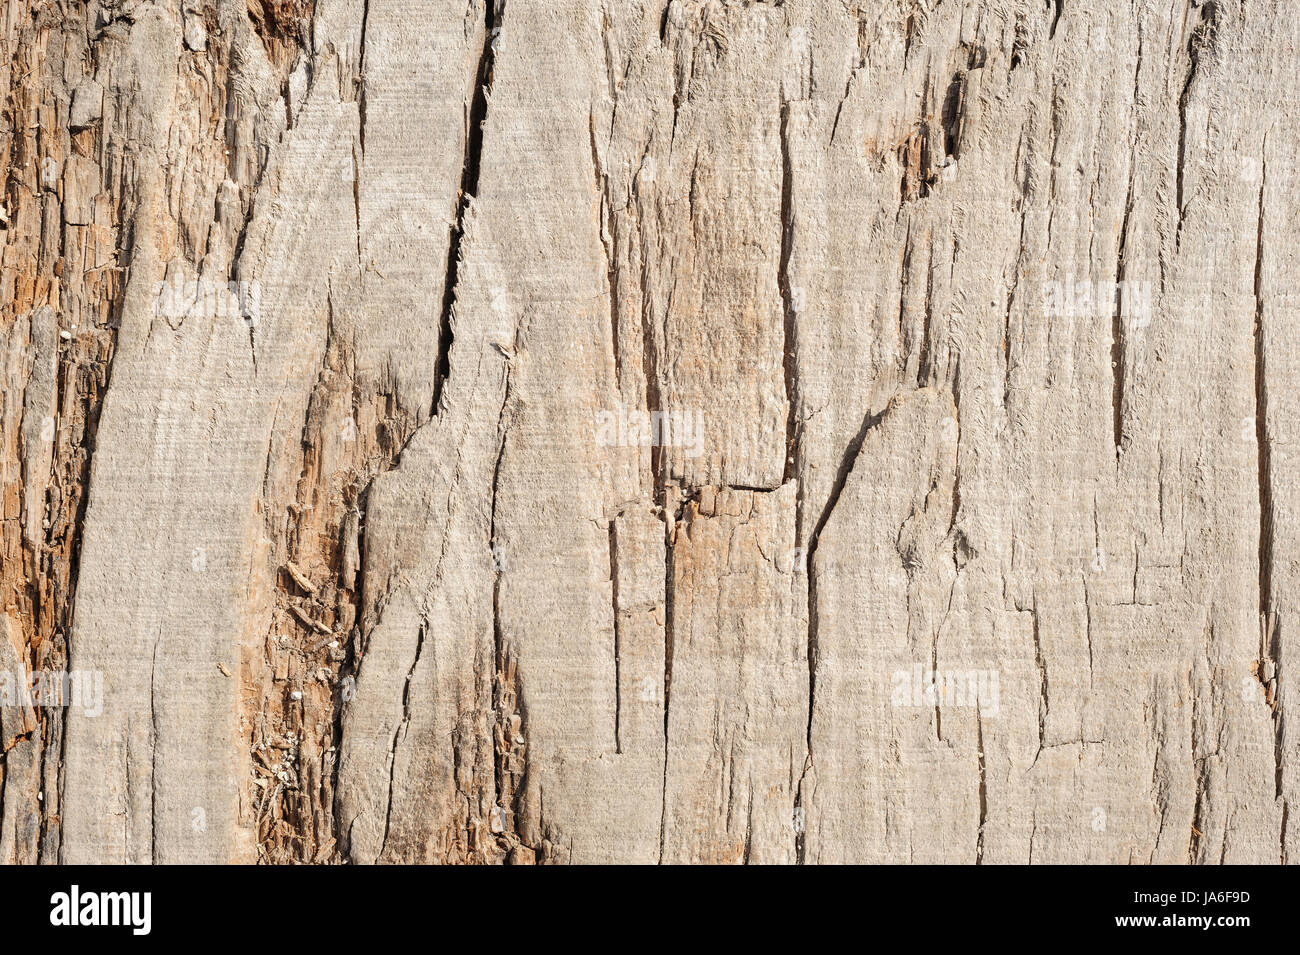 Wood planks, texture with natural pattern Stock Photo